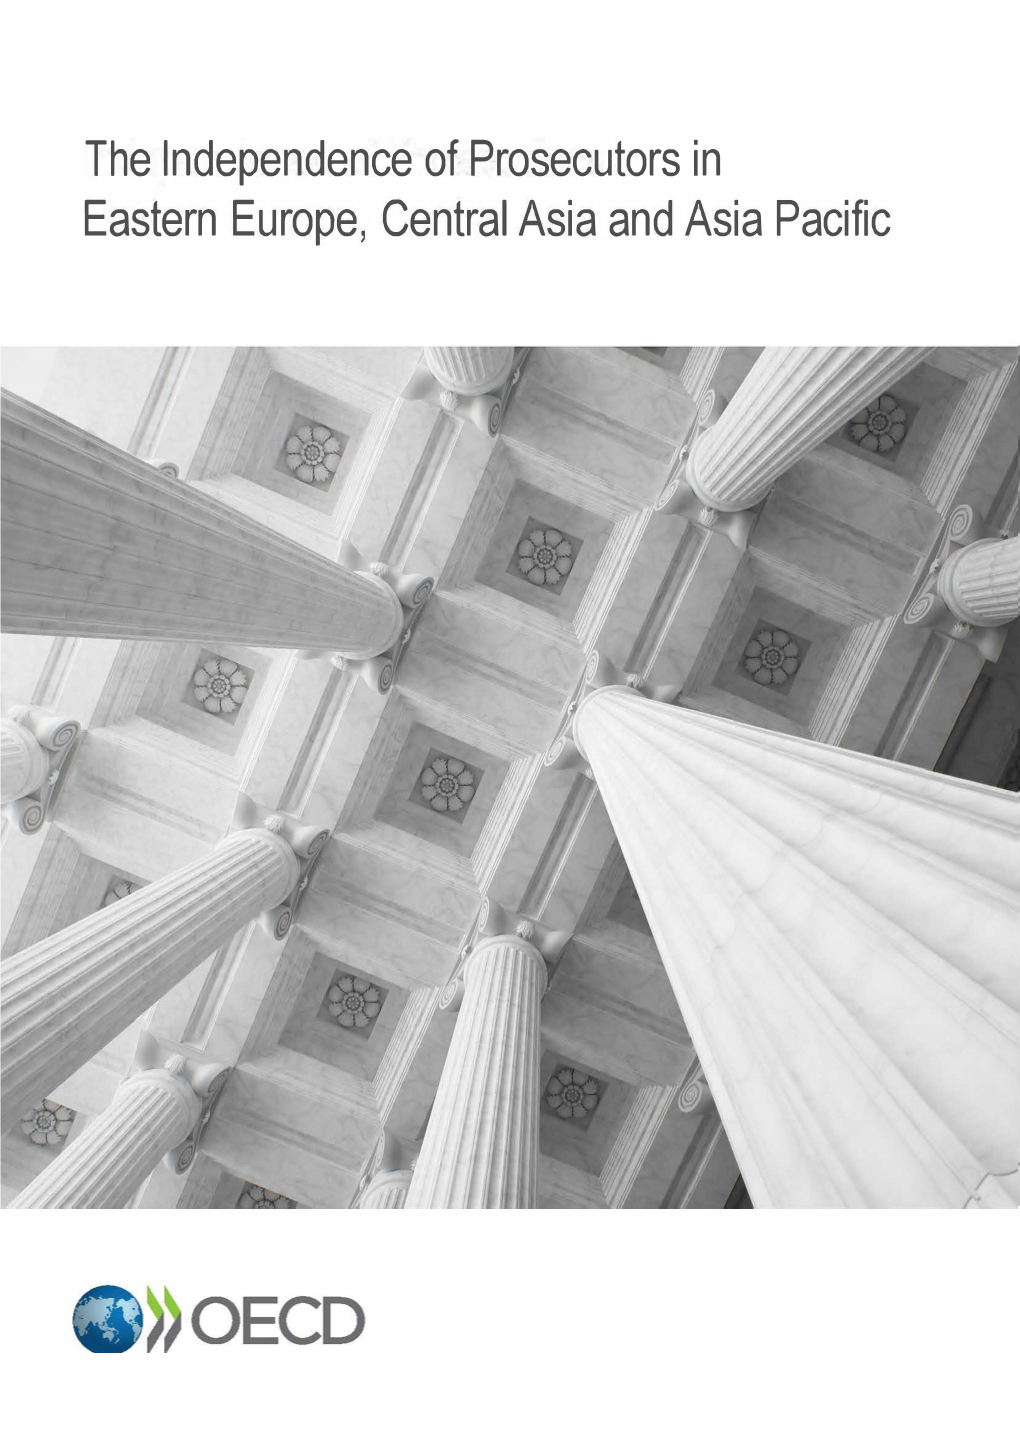 The Independence of Prosecutors in Eastern Europe, Central Asia and Asia Pacific